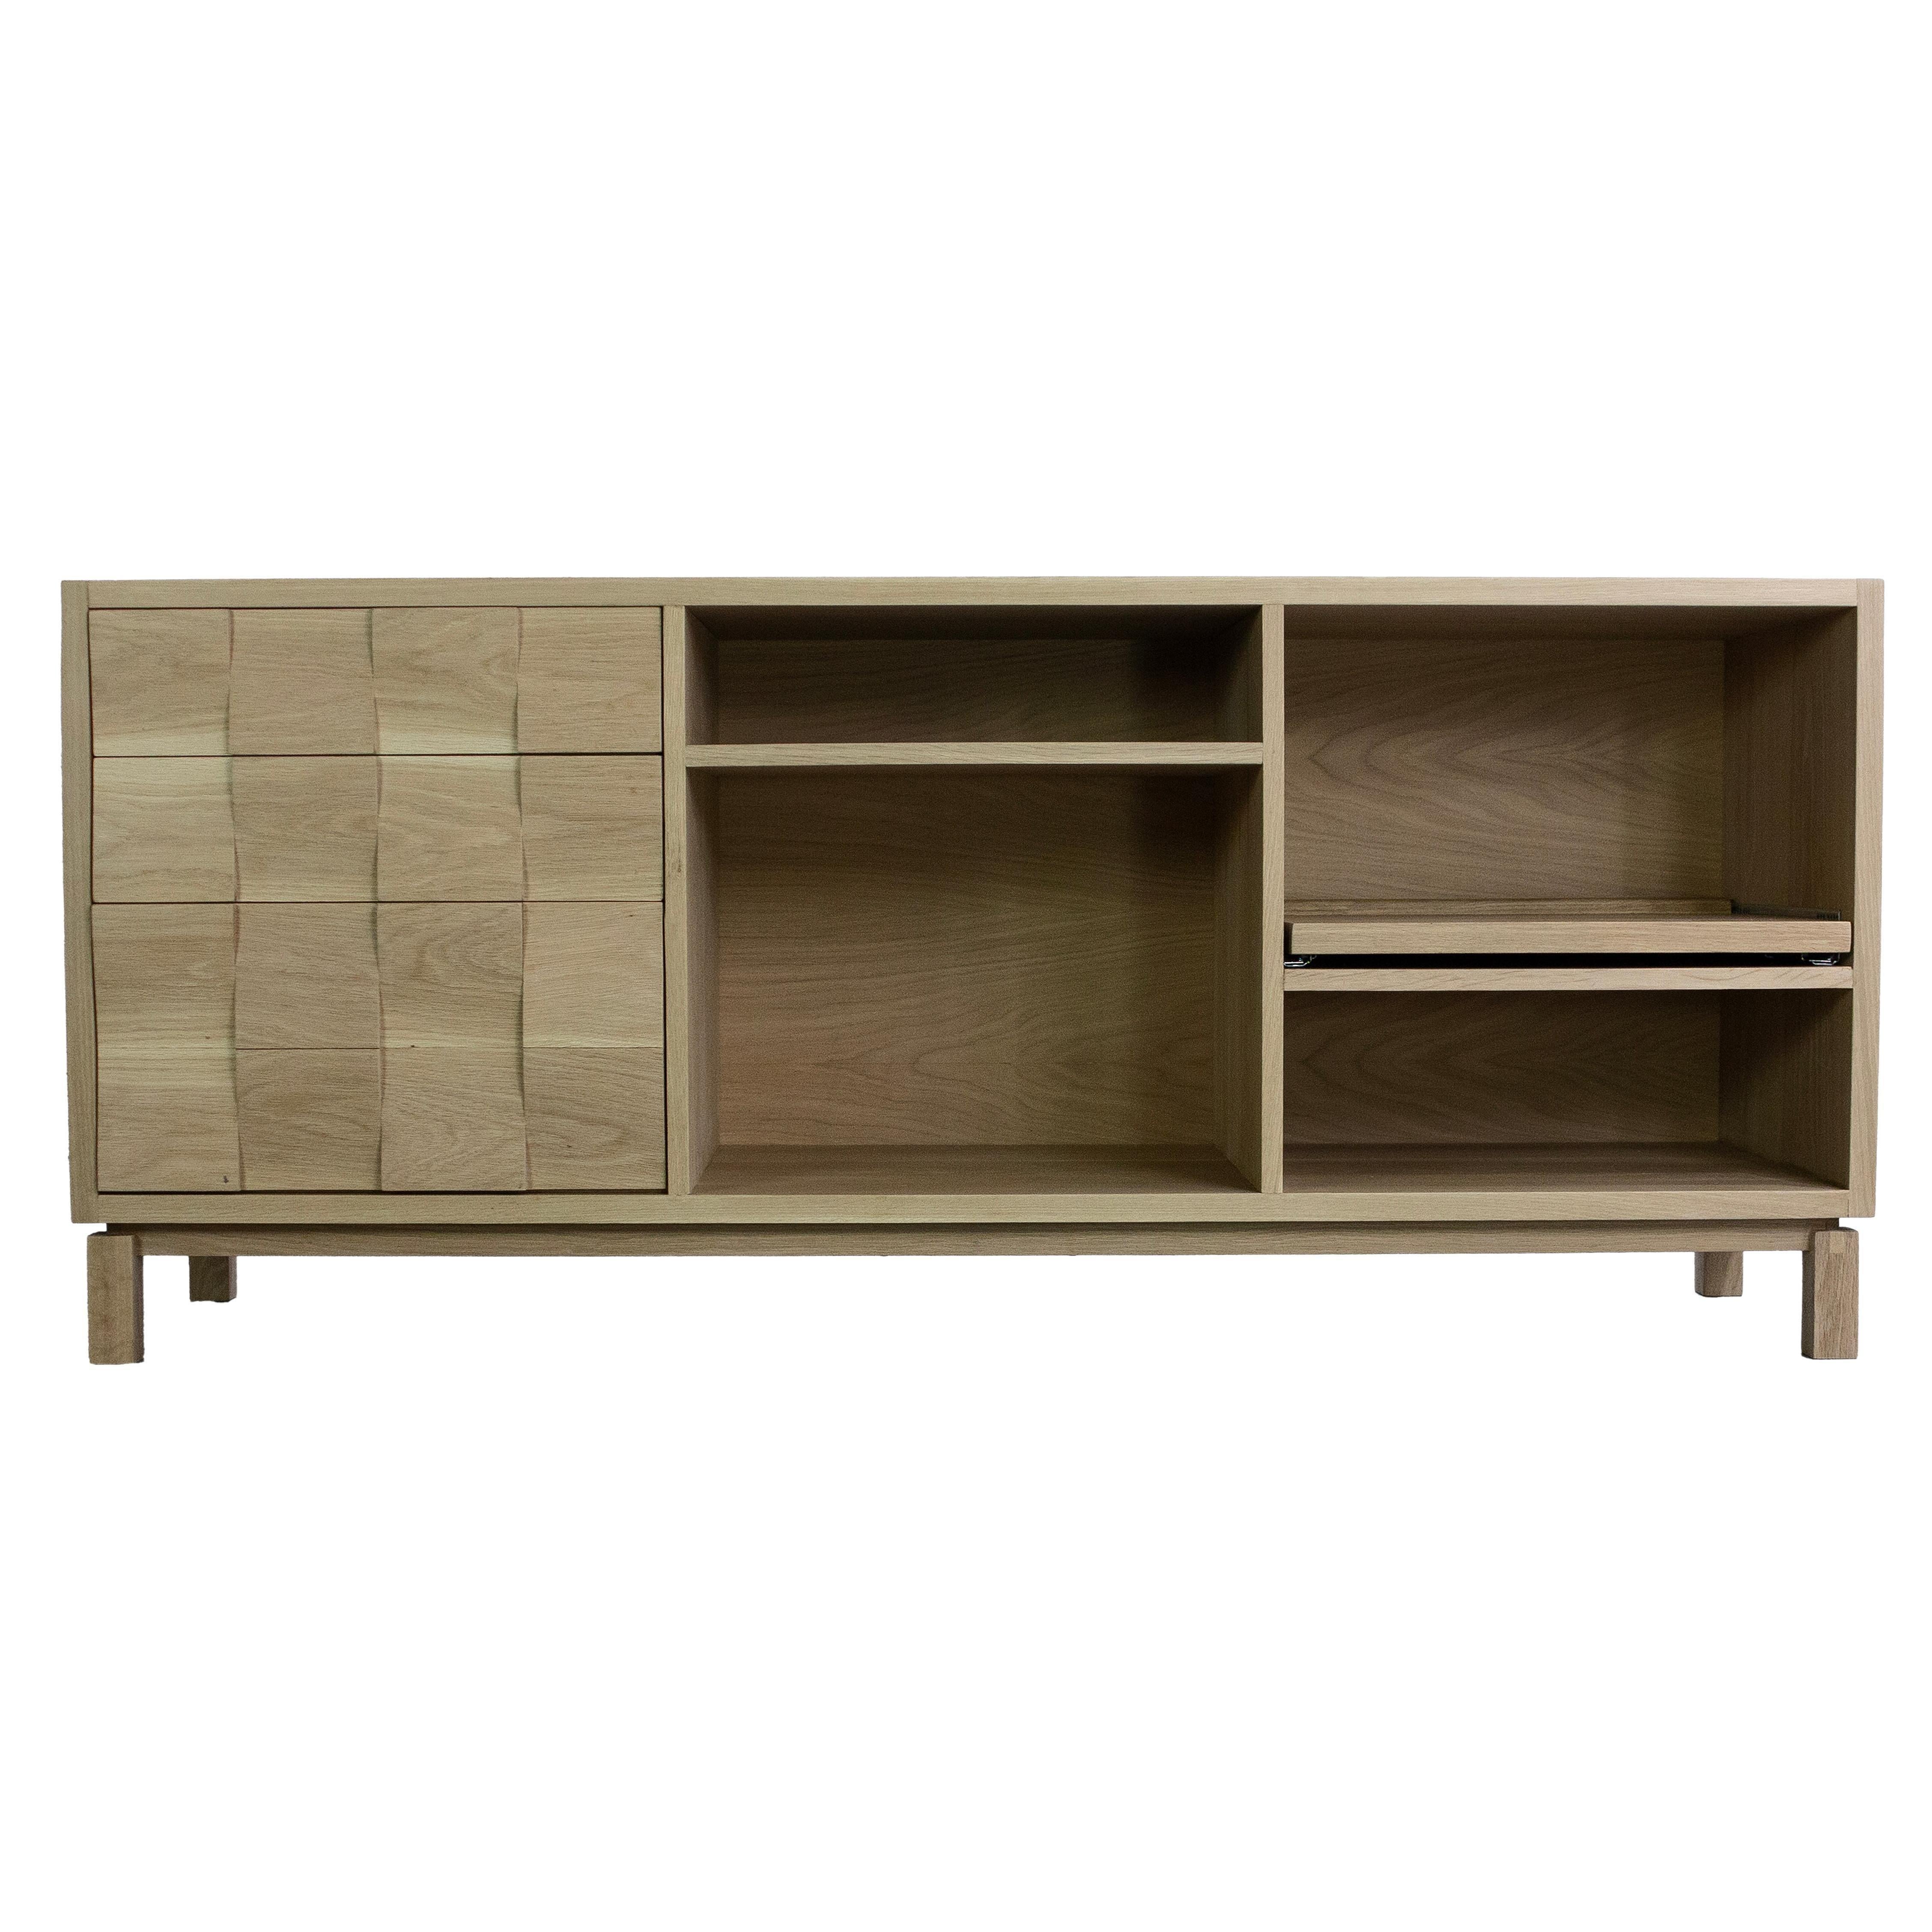 MEDIA CREDENZA in white oak featuring a push to open turntable shelf. For Sale